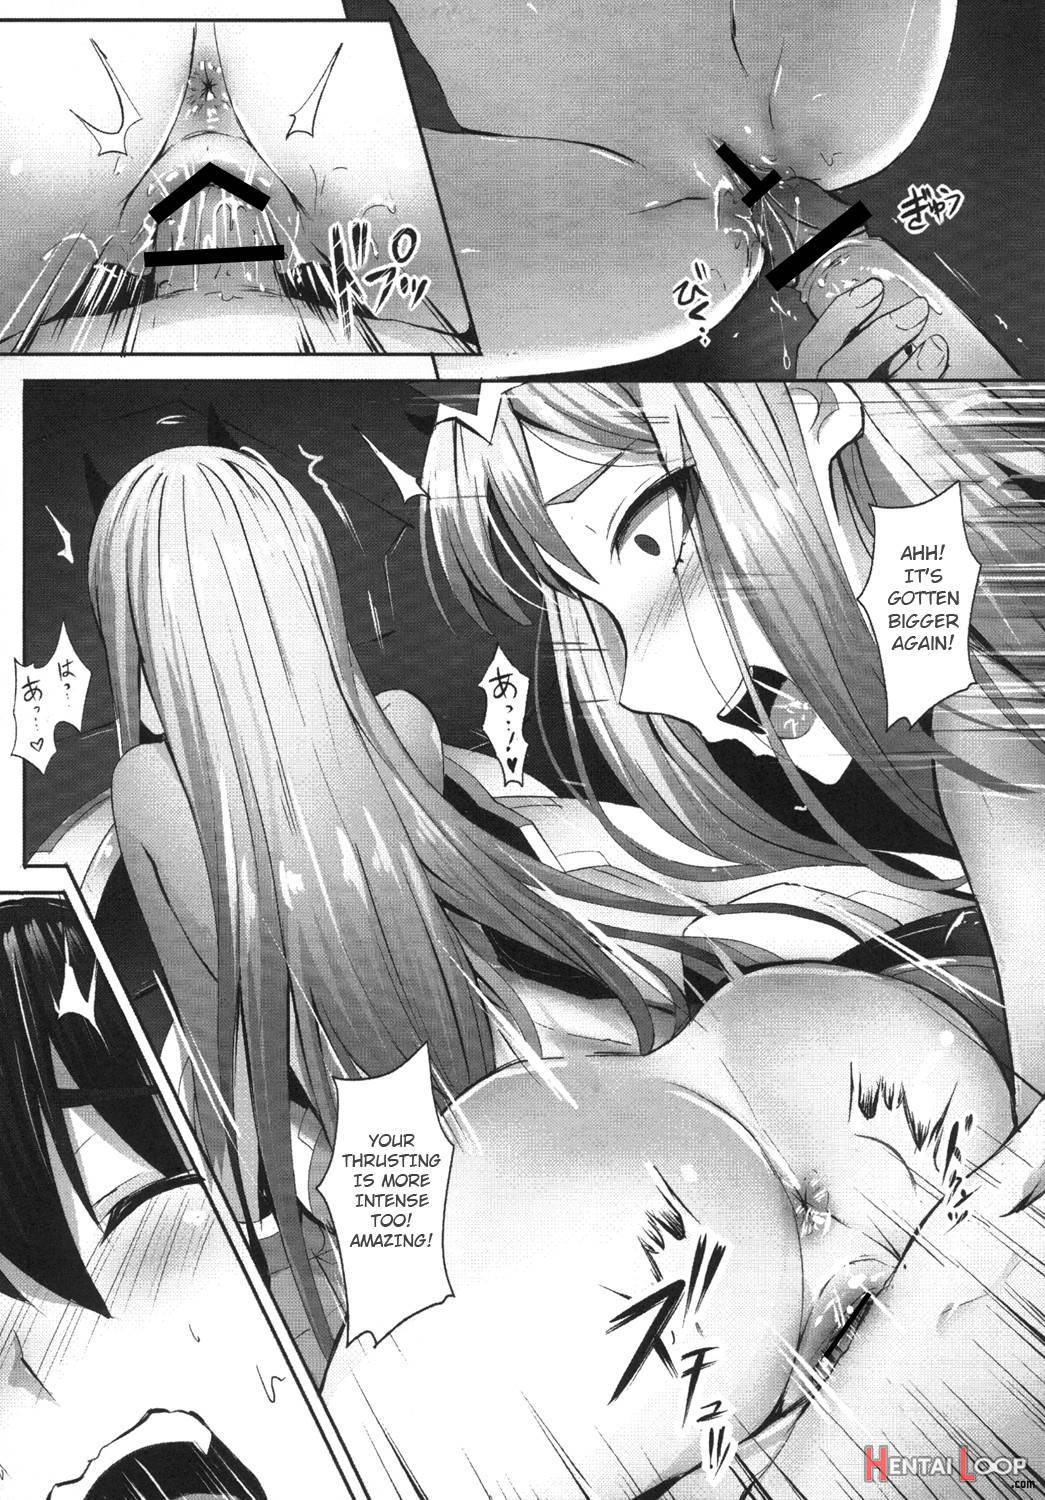 Darling Need More Sexx page 6